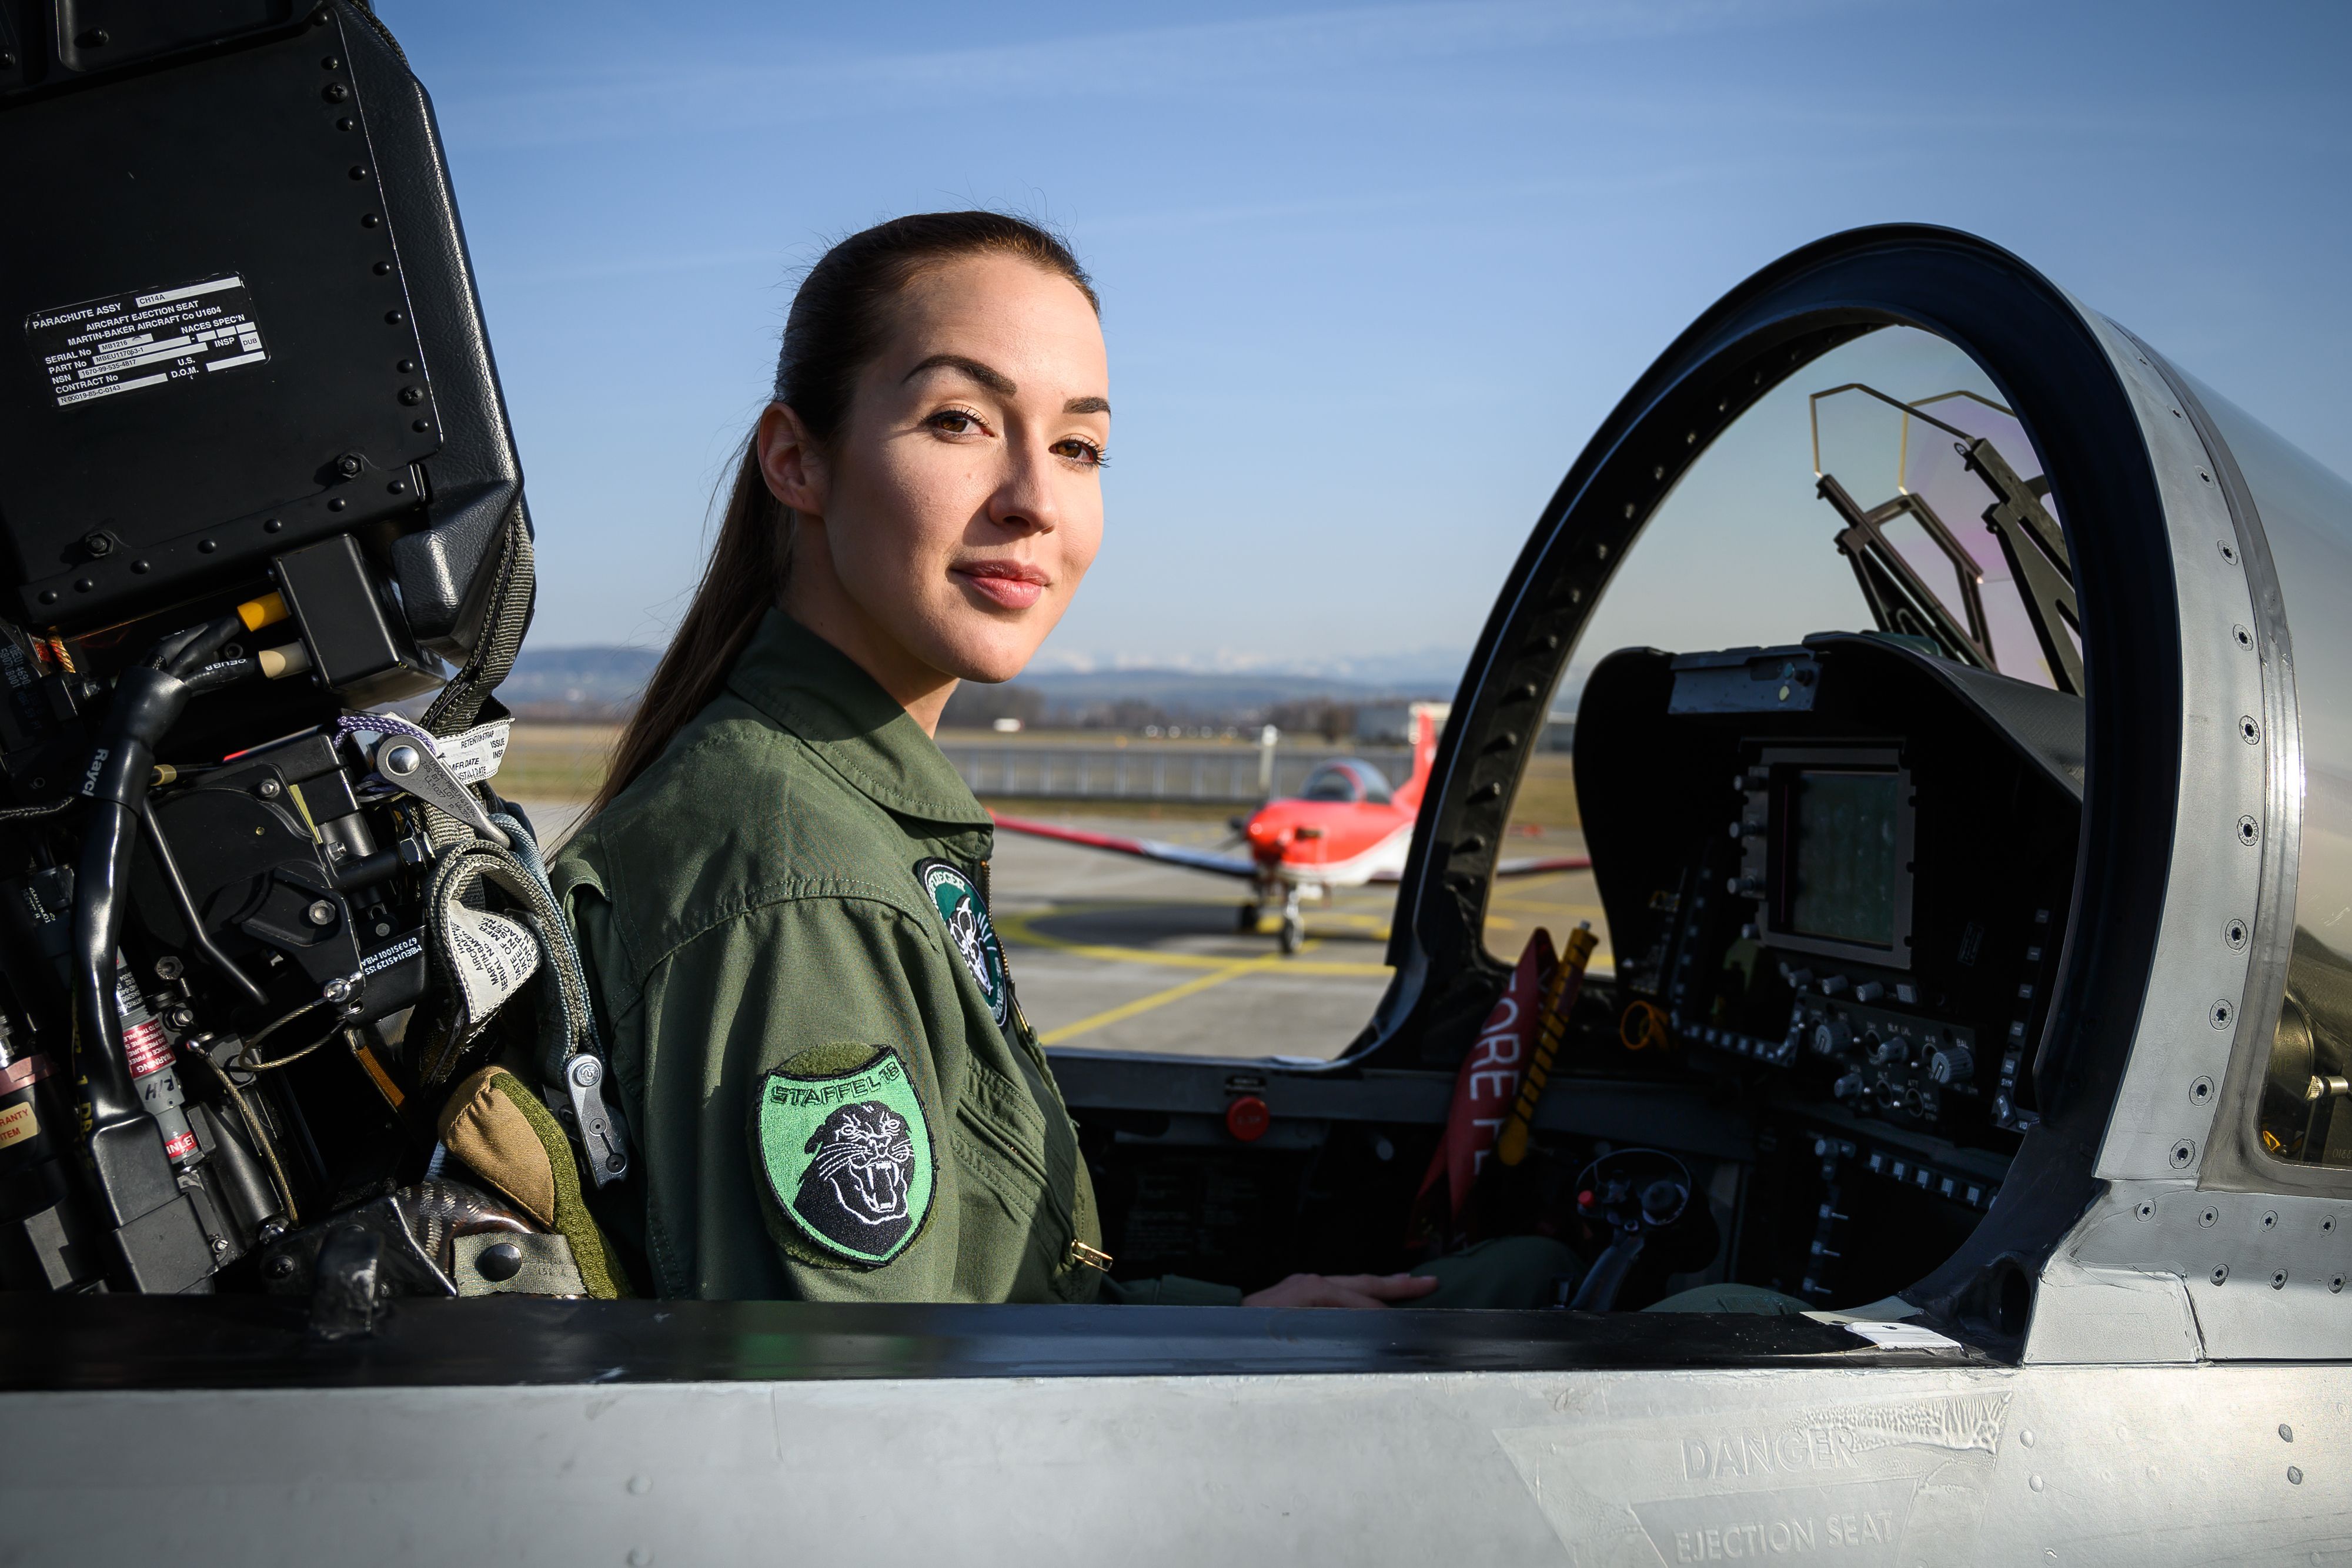 First Lieutenant Fanny Chollet, the first woman to fly an F / A-18 Hornet fighter in Switzerland poses during a press conference at Payerne Air Base photo.